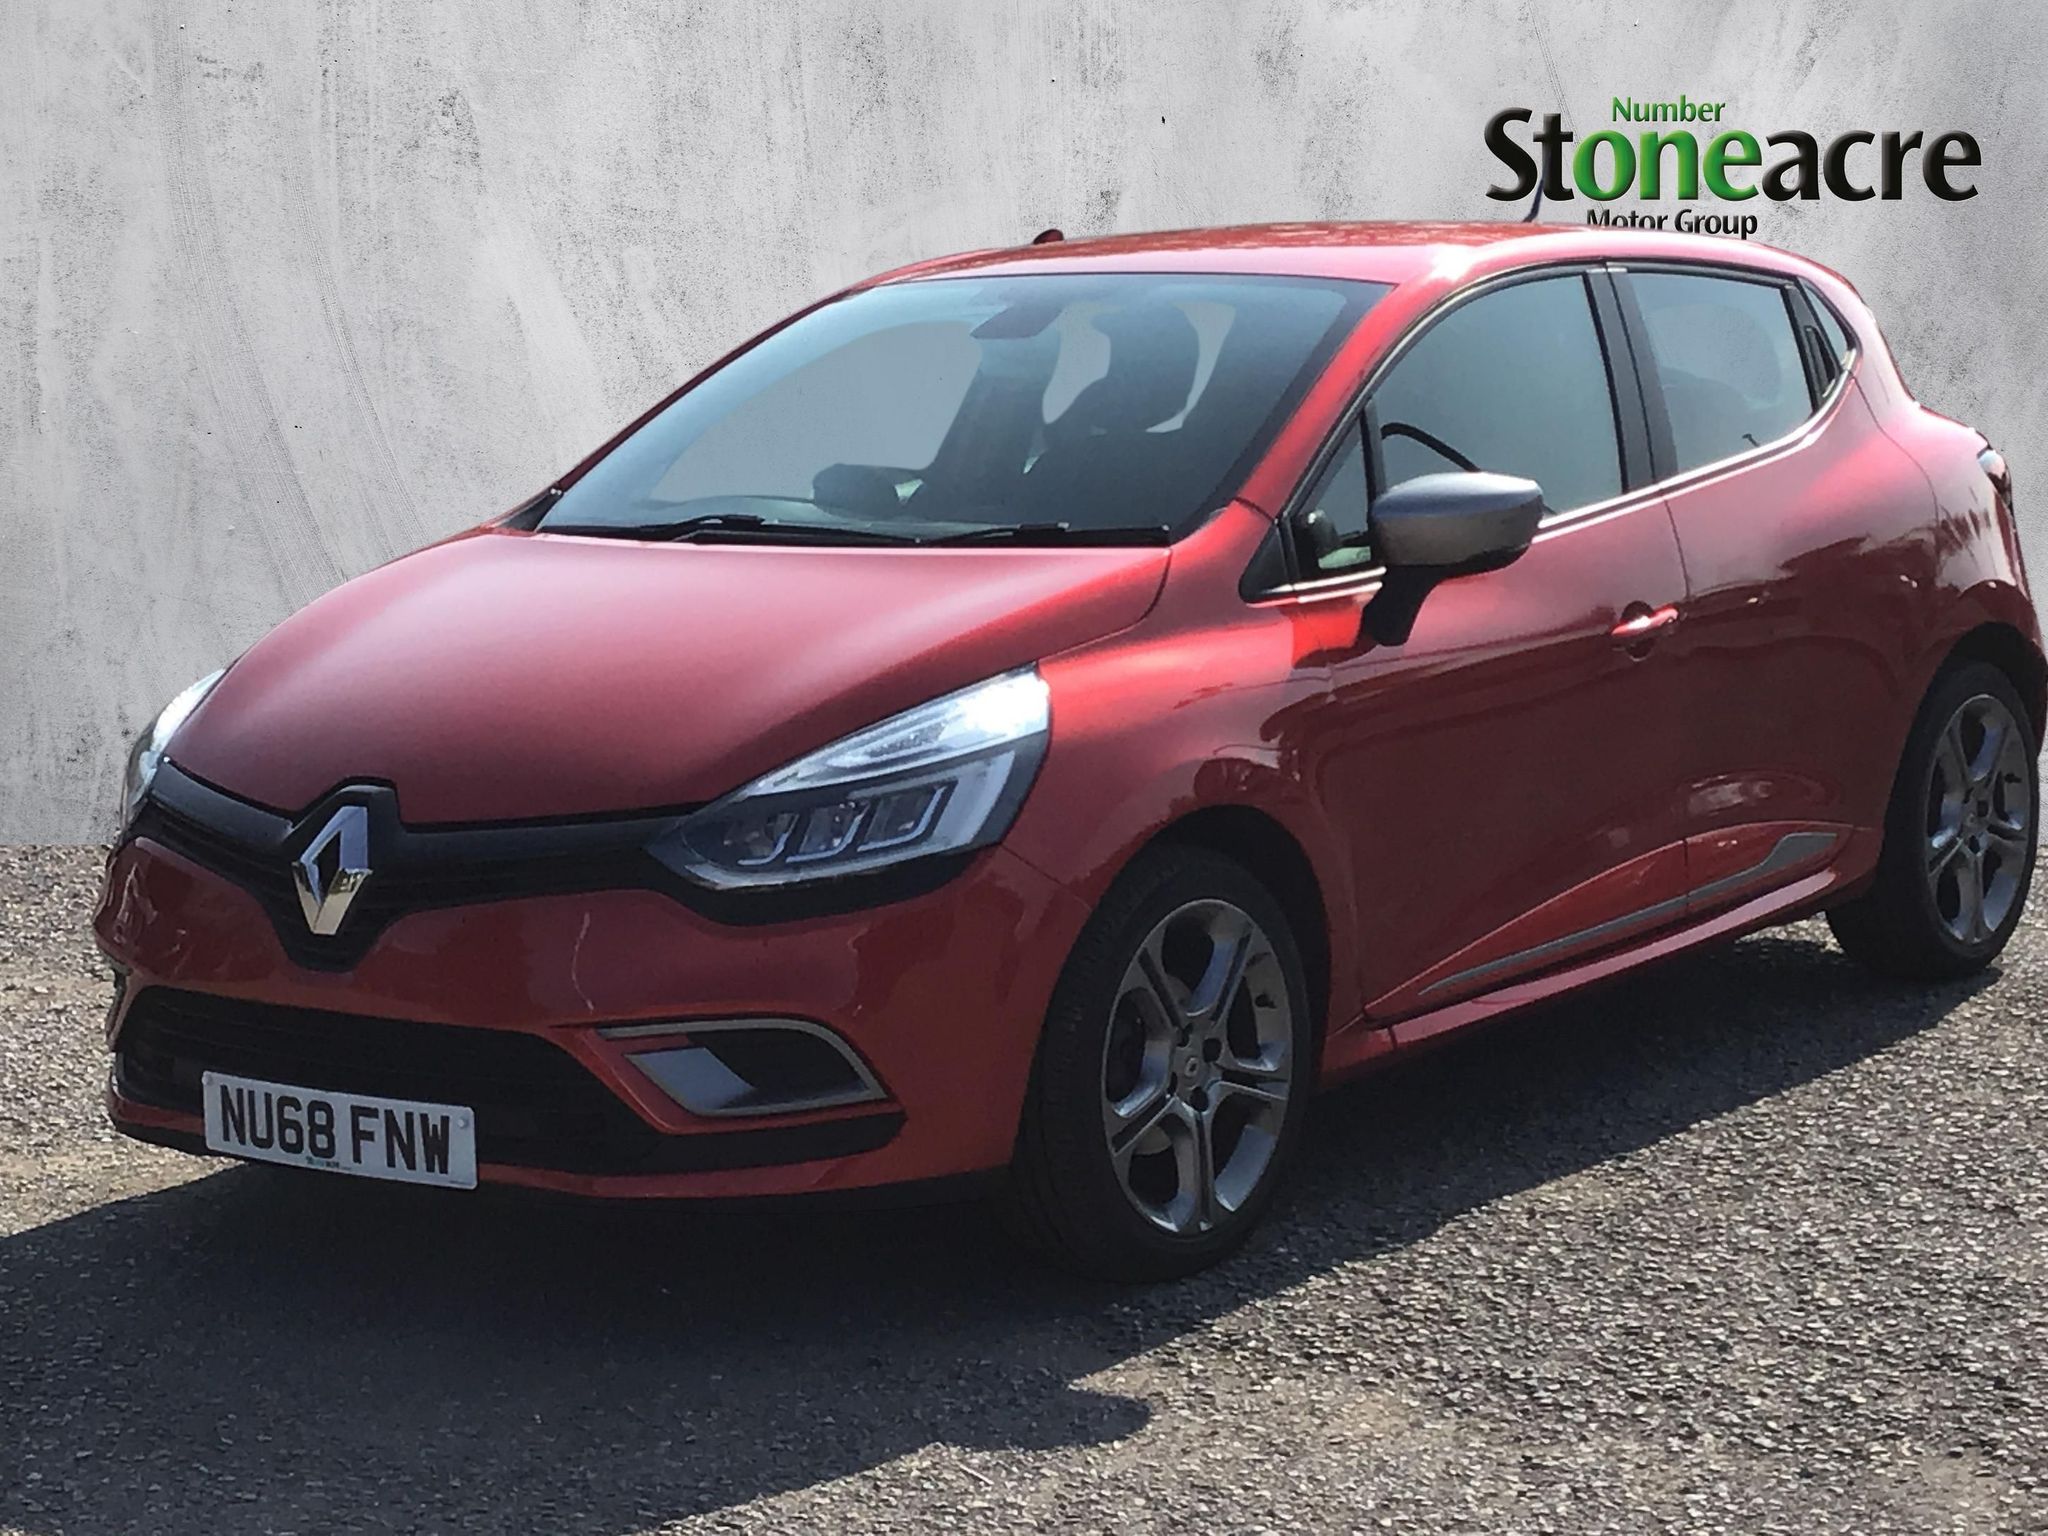 Used Renault Clio 1.5 dCi 90 GT Line 5dr (NU68FNW) Stoneacre